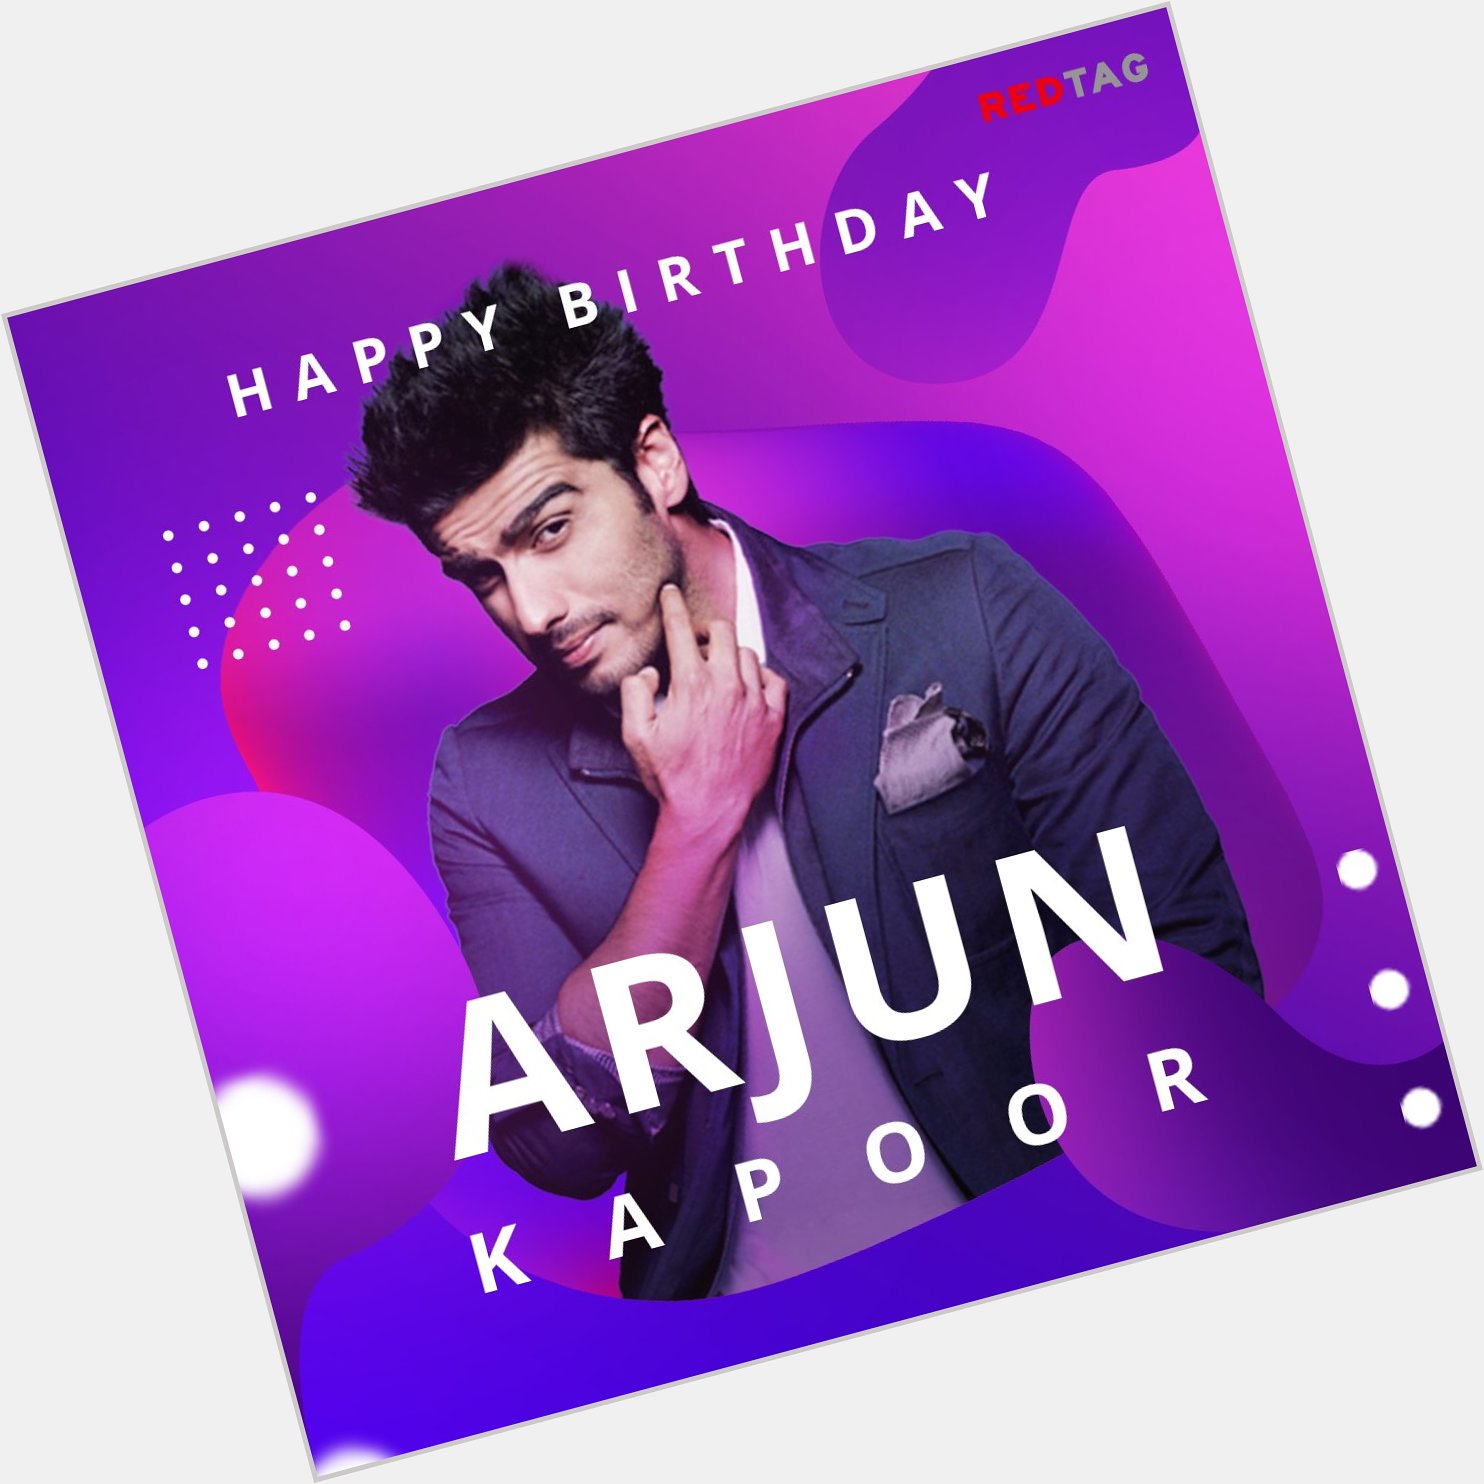 A very happy to the Arjun Kapoor! 